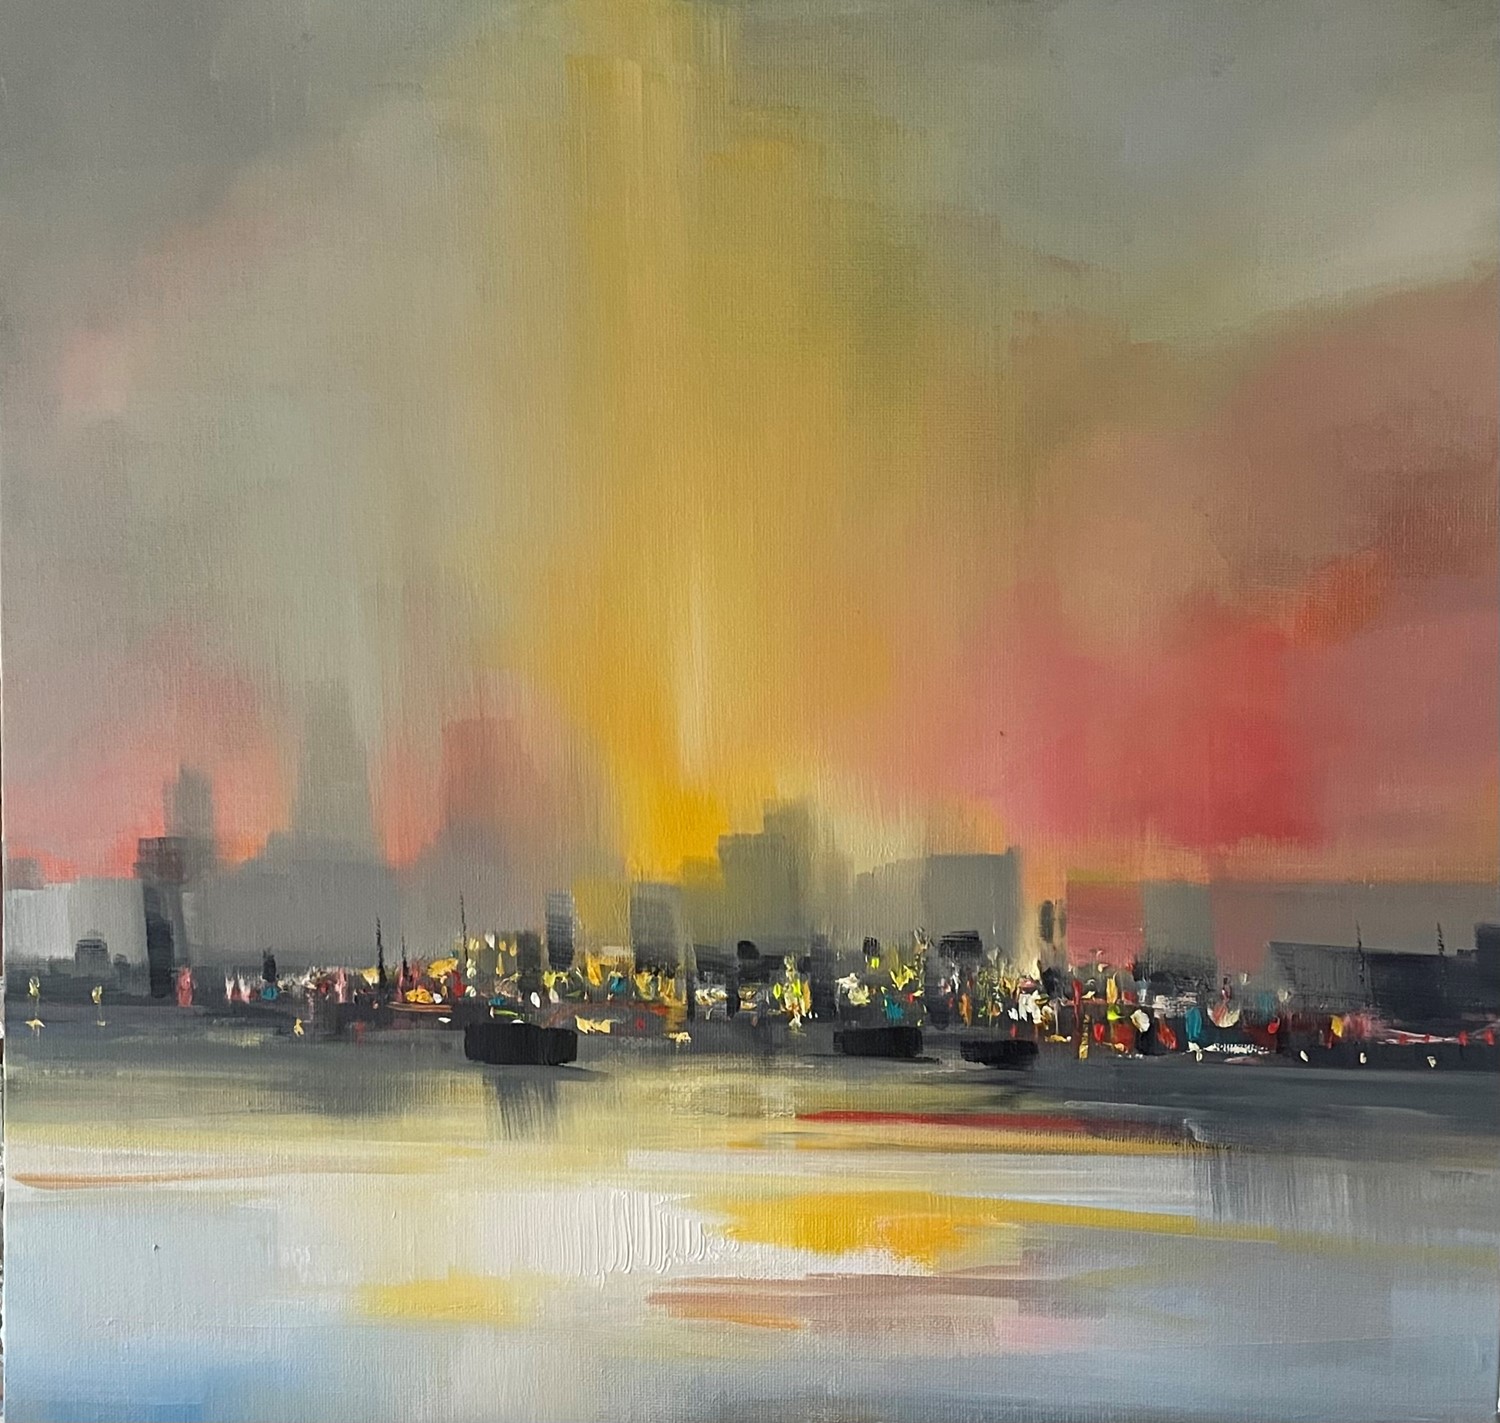 'The sprawl of the city lights ' by artist Rosanne Barr